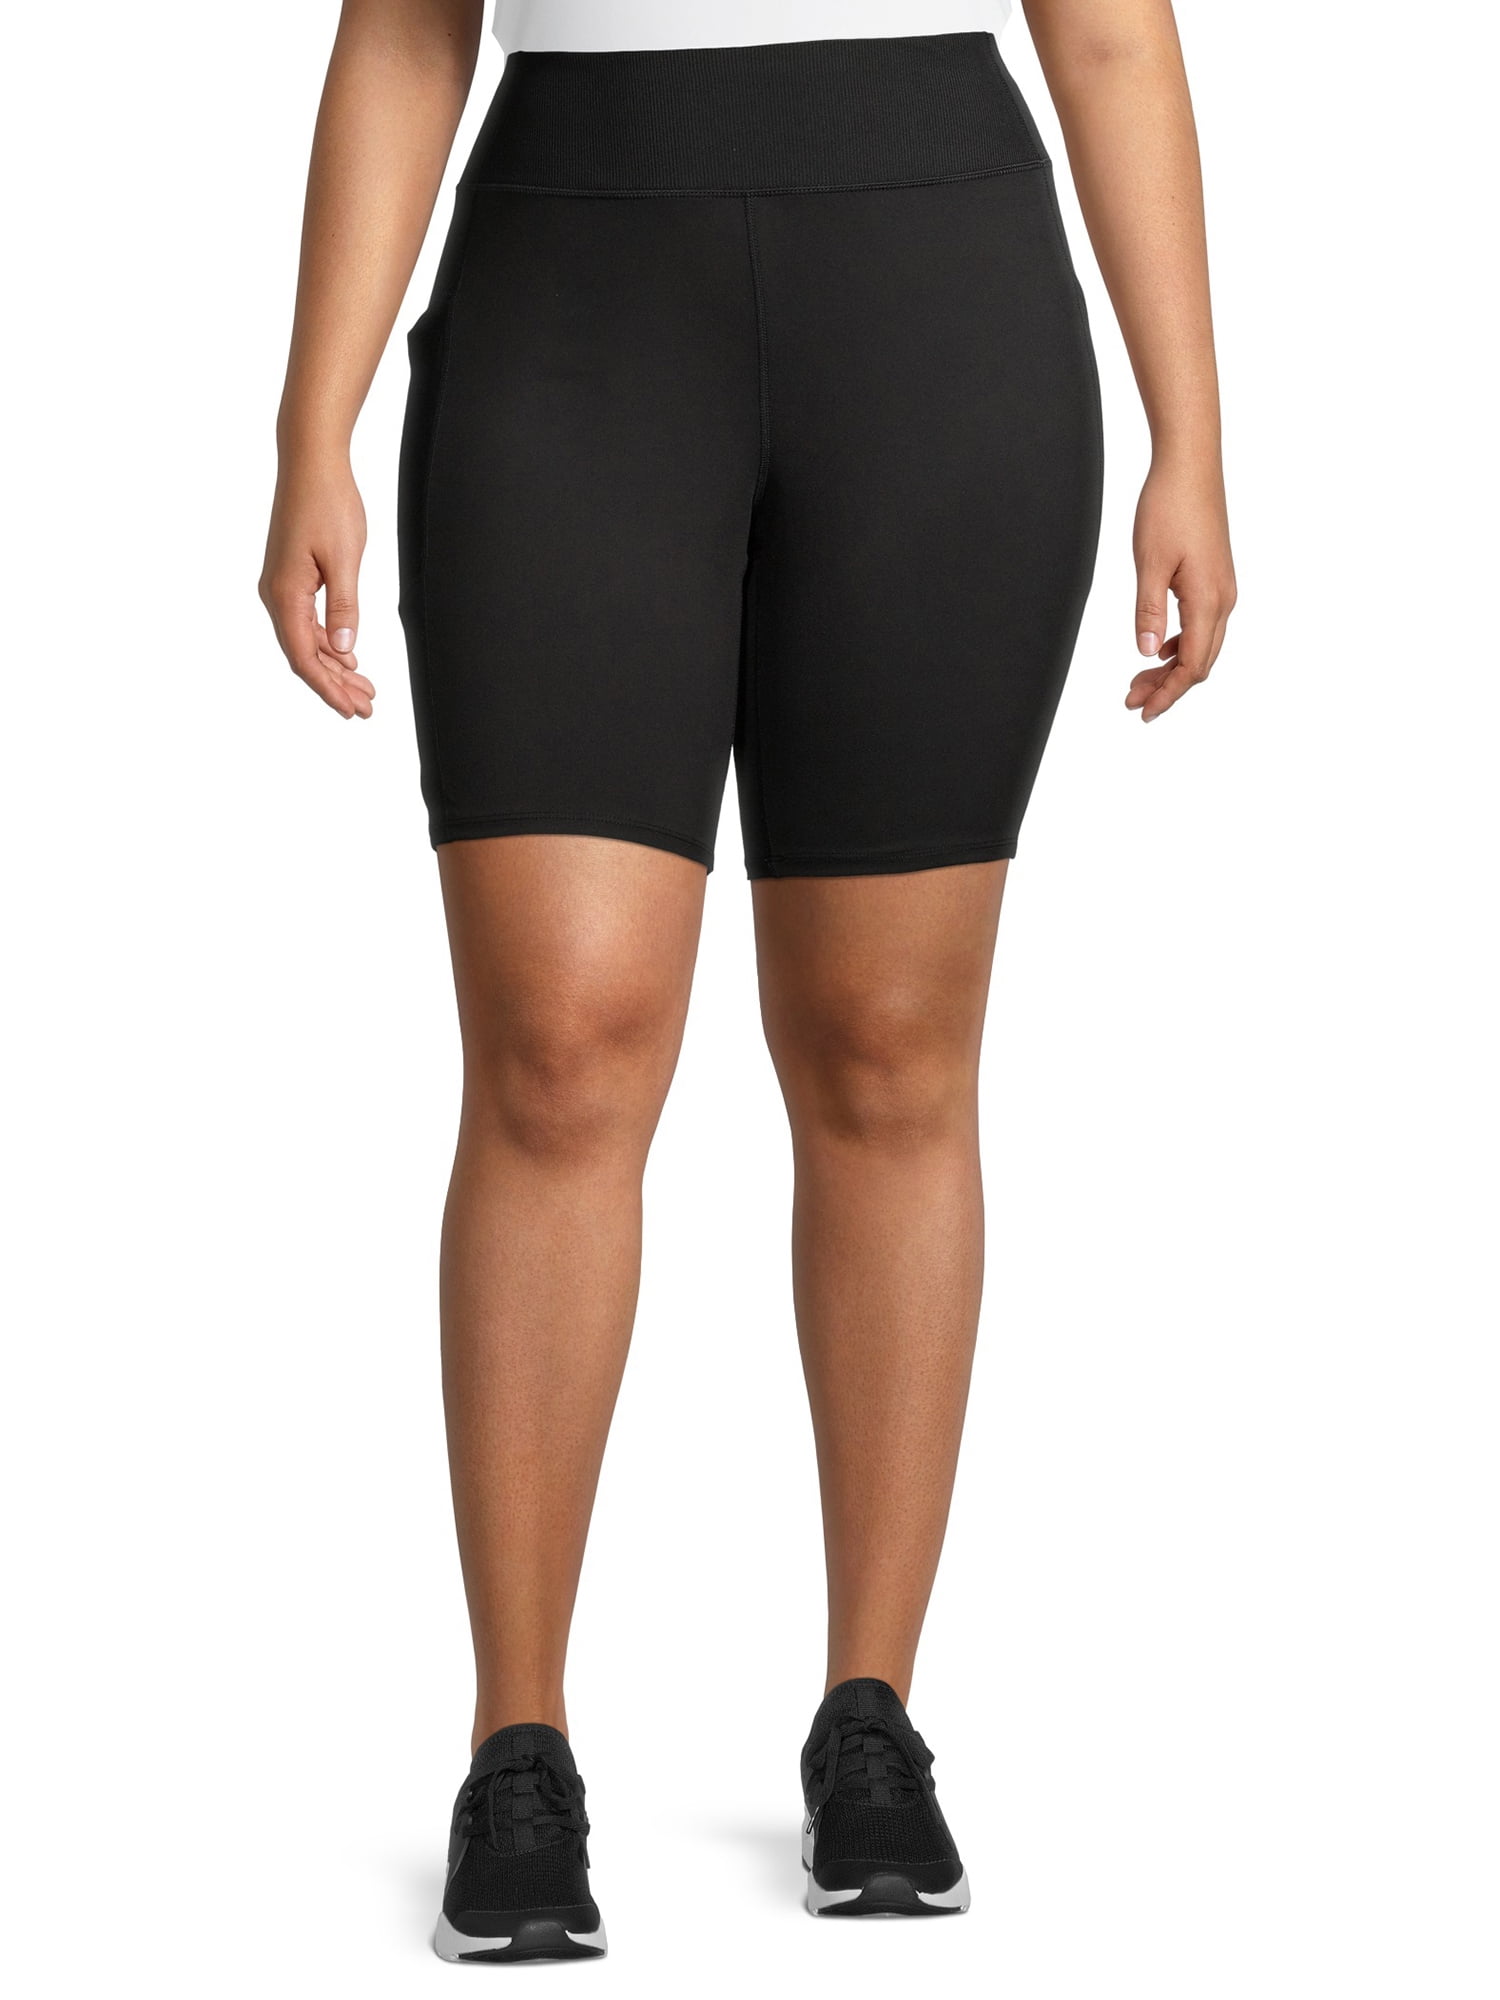 Athletic Works - Athletic Work's Women's Plus Size 9